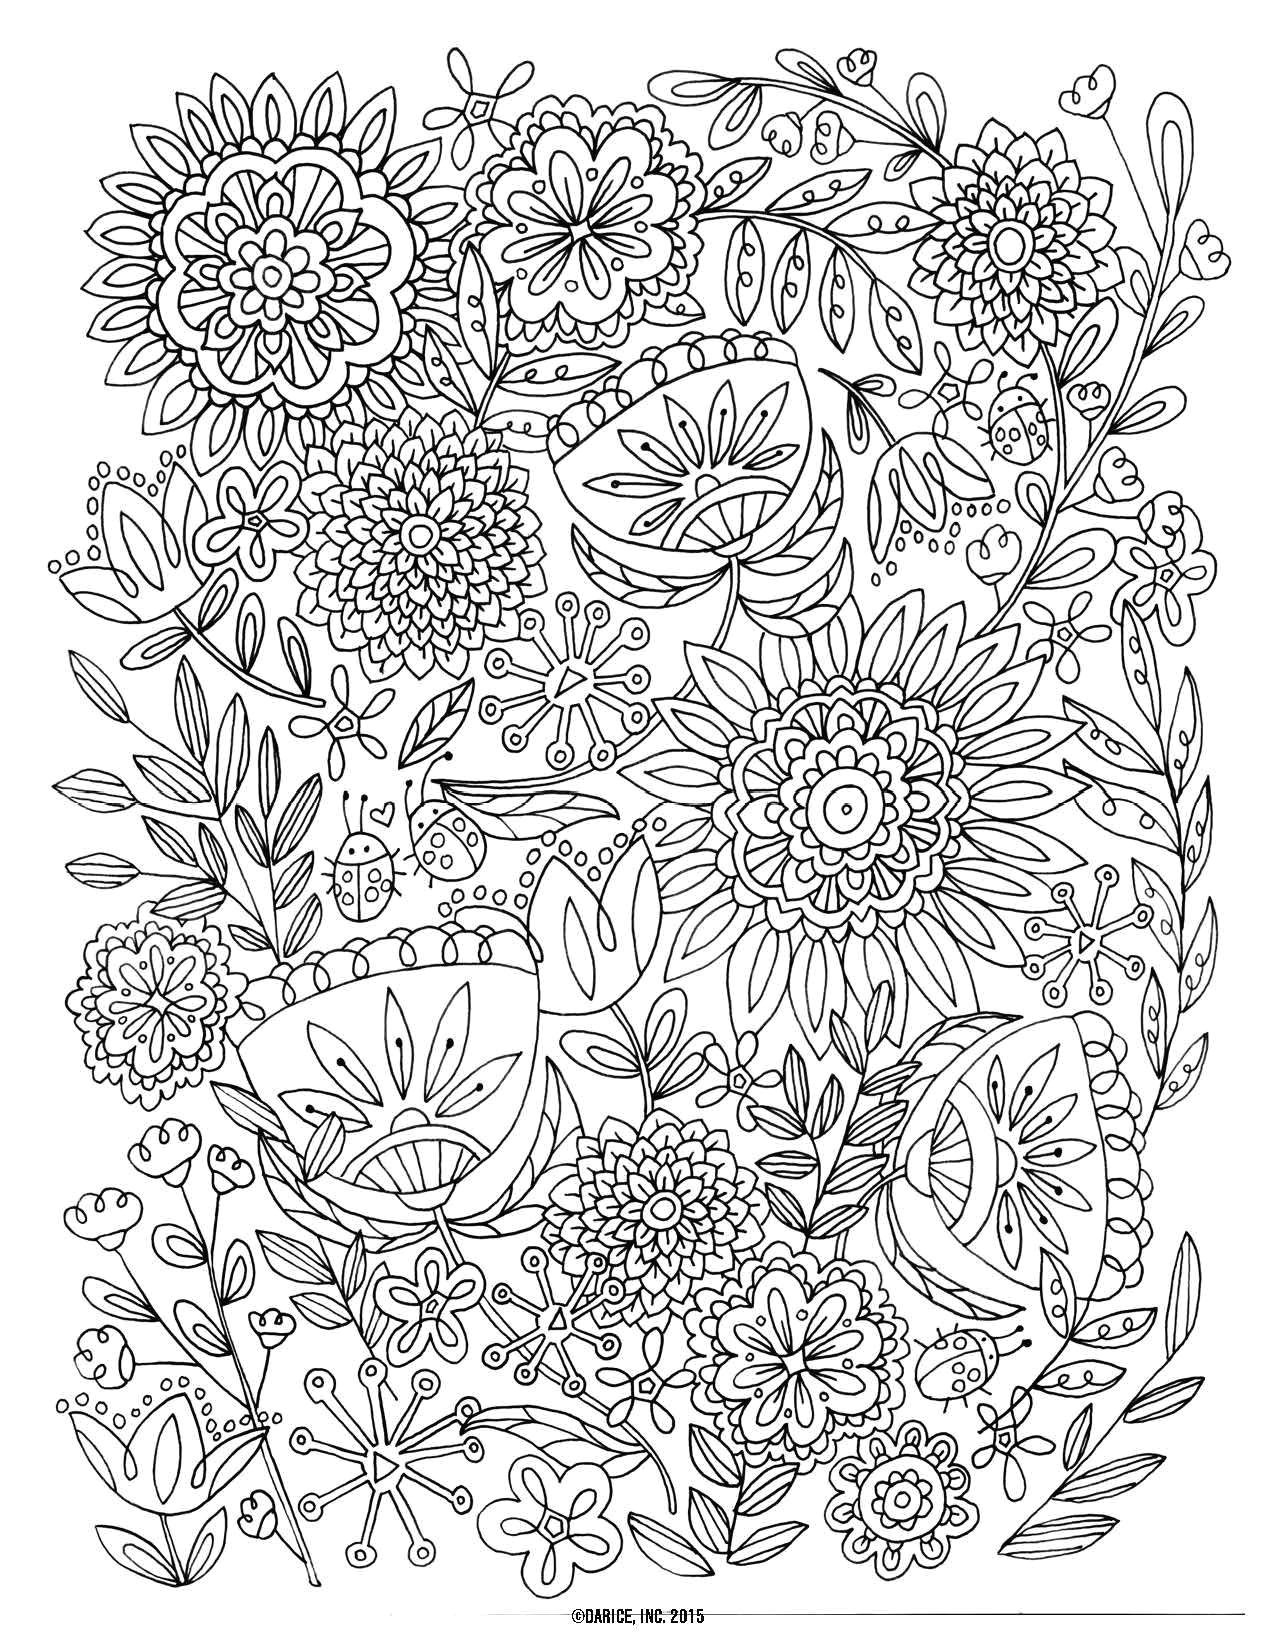 Drawing Of Flowers with Vase Drawing Doodling and Coloring Unique Cool Vases Flower Vase Coloring